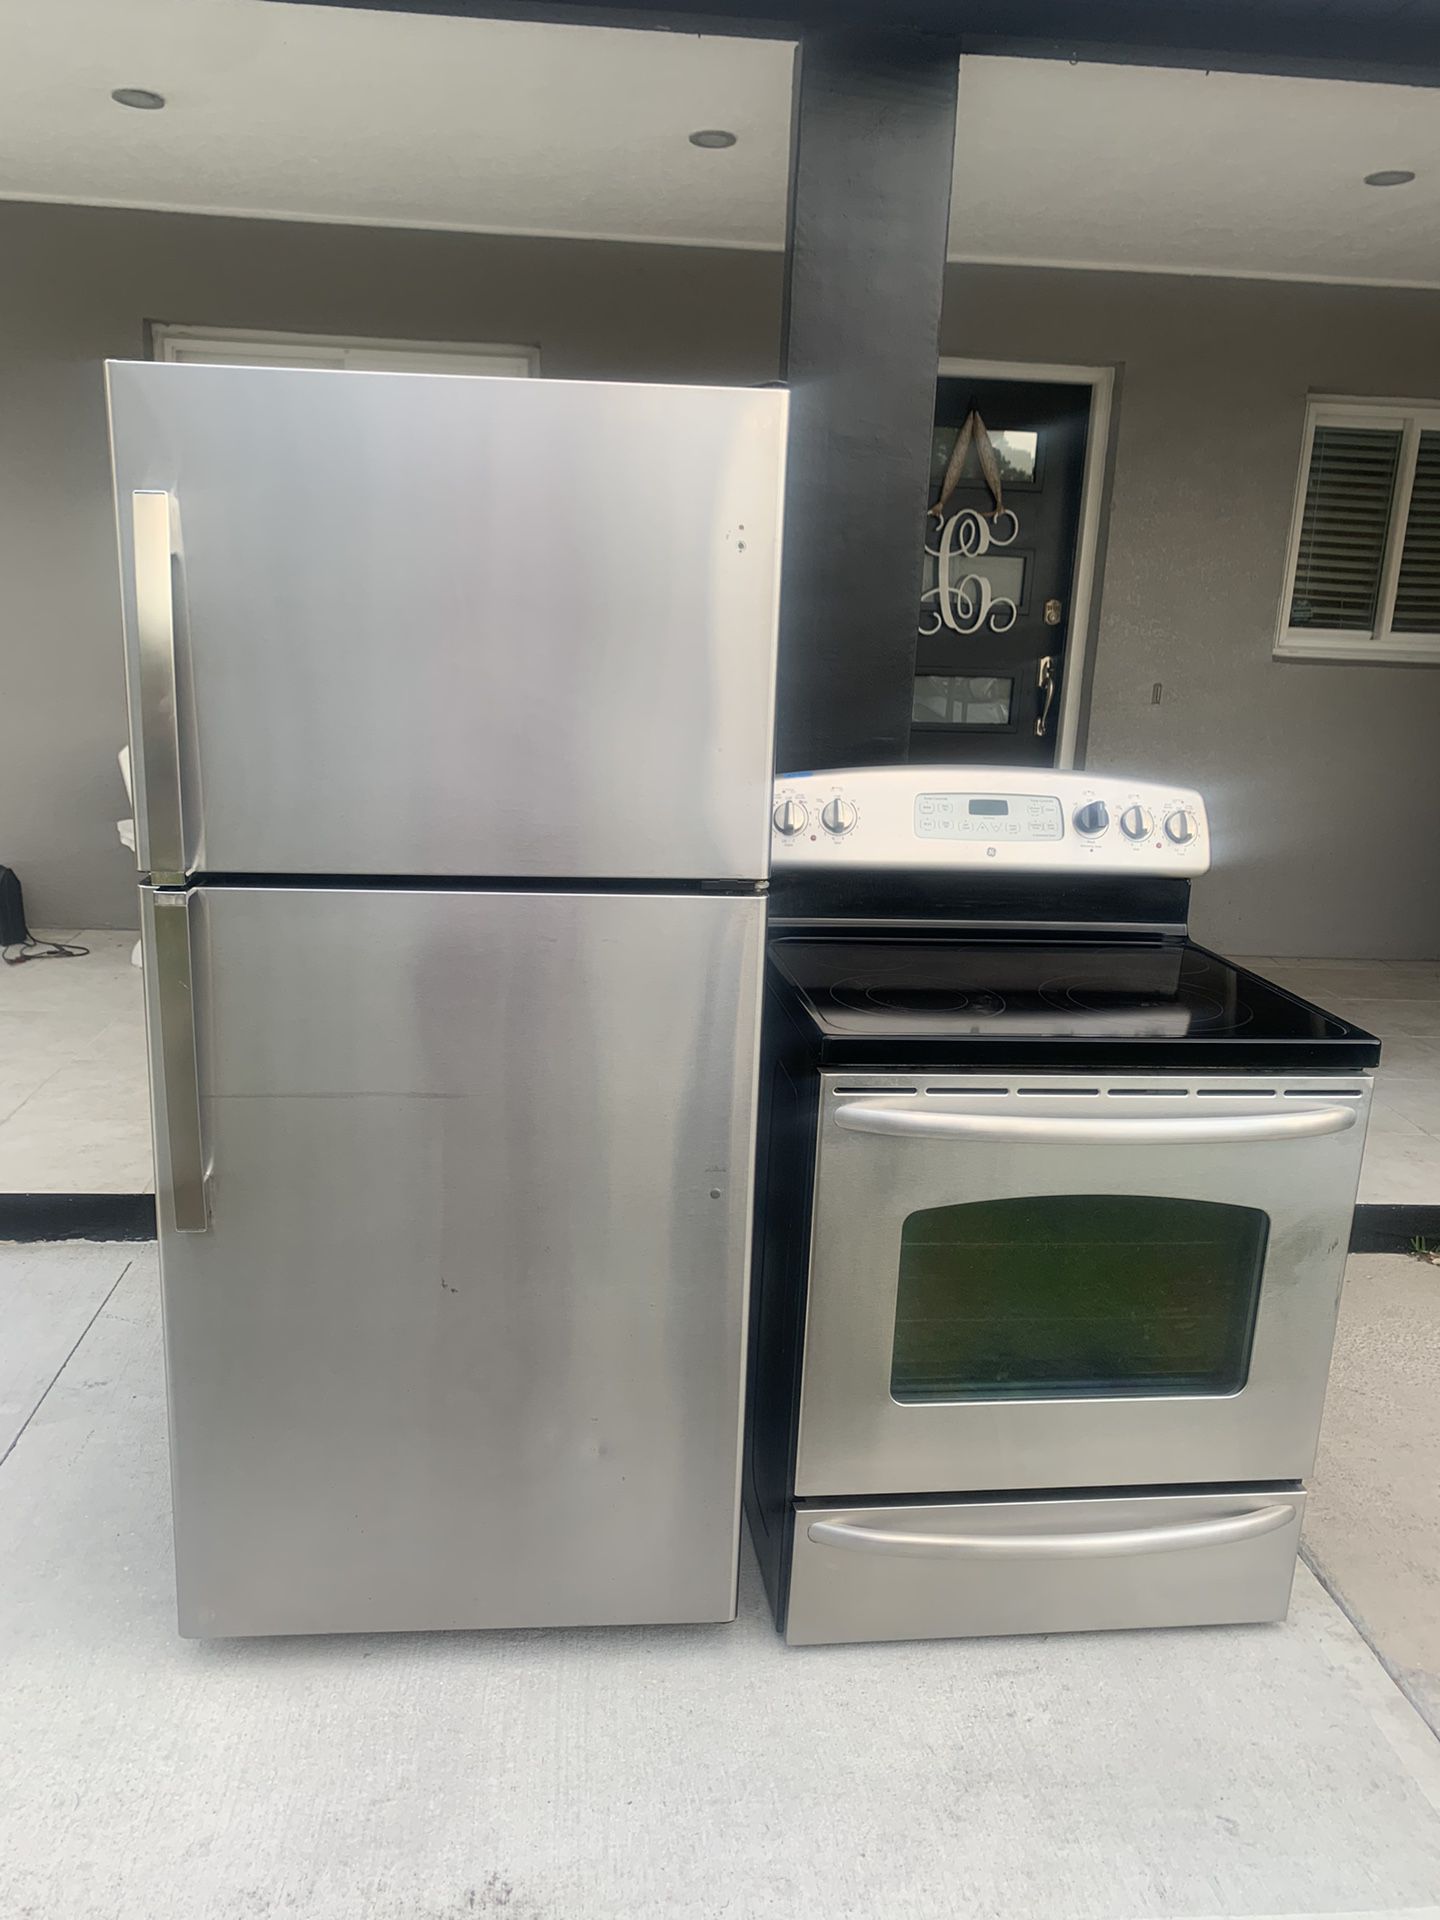 Fridge And Stove Working Great No Issues $420 Both 